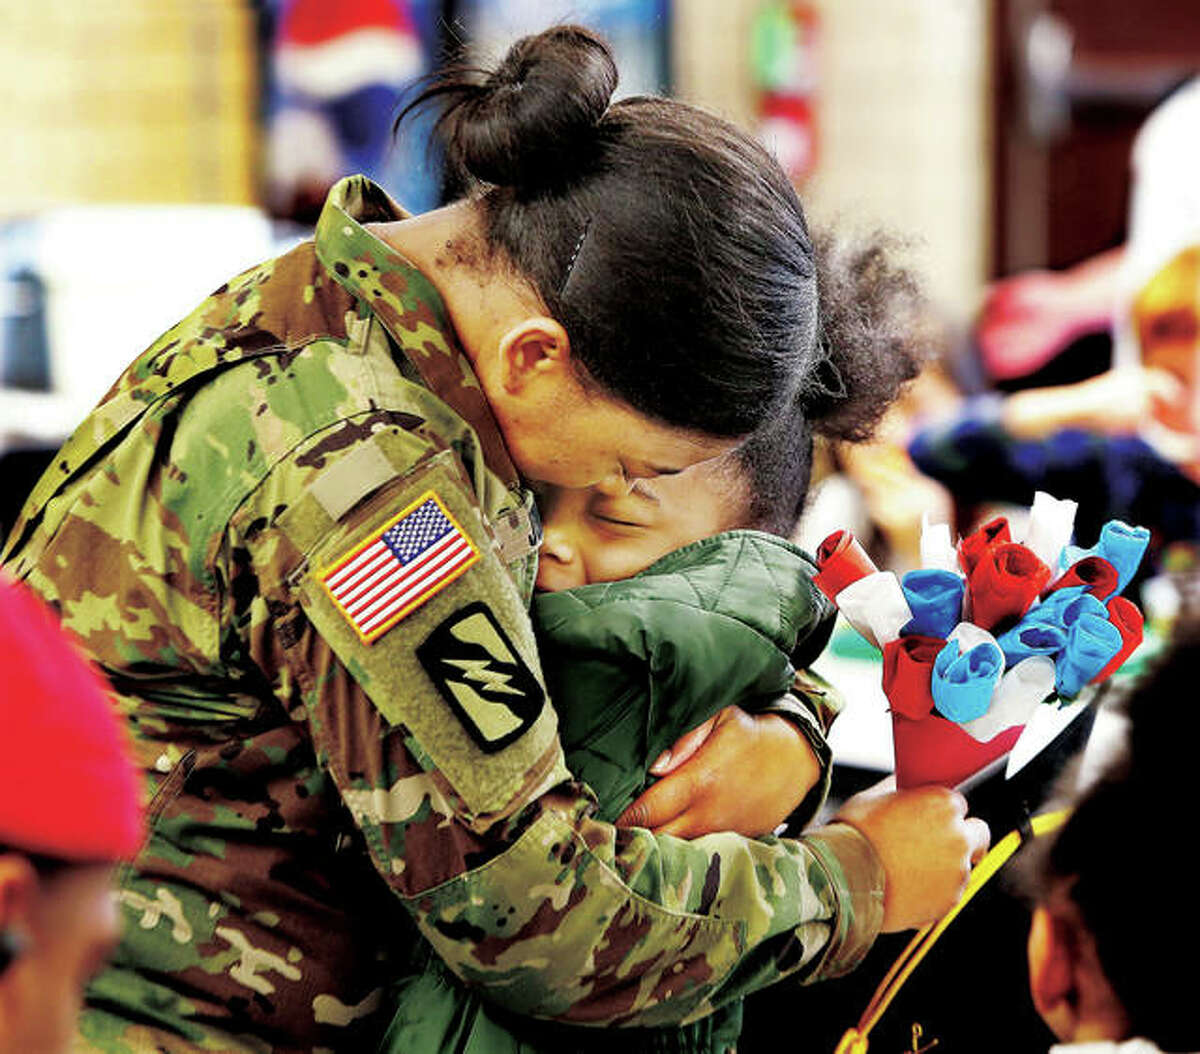 John Badman of The Telegraph won a first place award in the 2019 Illinois Press Association for this photo of Sgt. Kyra Jones, who just returned home from a year-long deployment to Kuwait, giving a hug to her daughter, Raquel, a second grade student at Alton’s West Elementary School. The newspaper won 18 awards in this year’s competition.